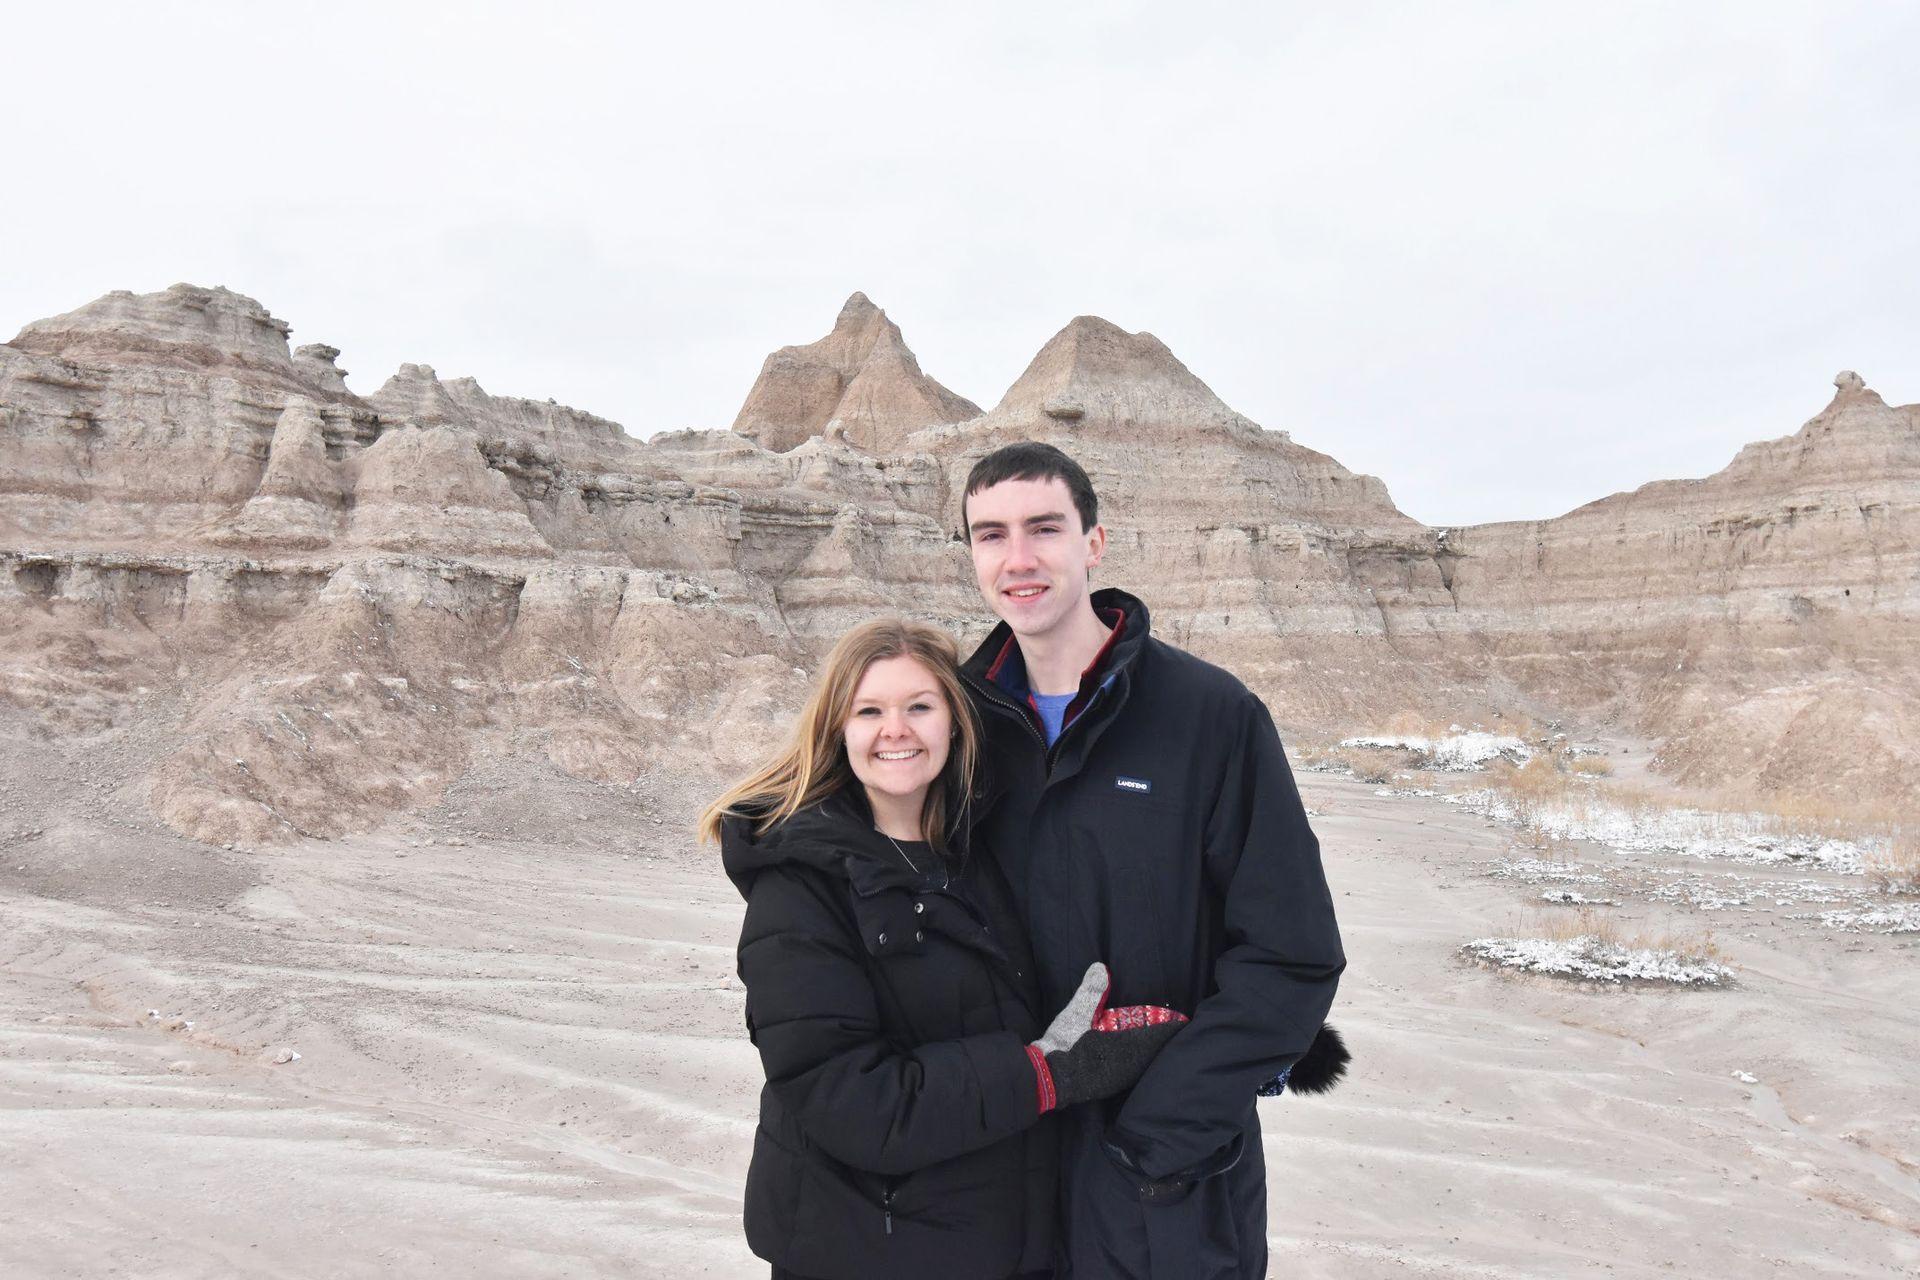 Lydia and Joe standing in front of rocks in the Badlands.